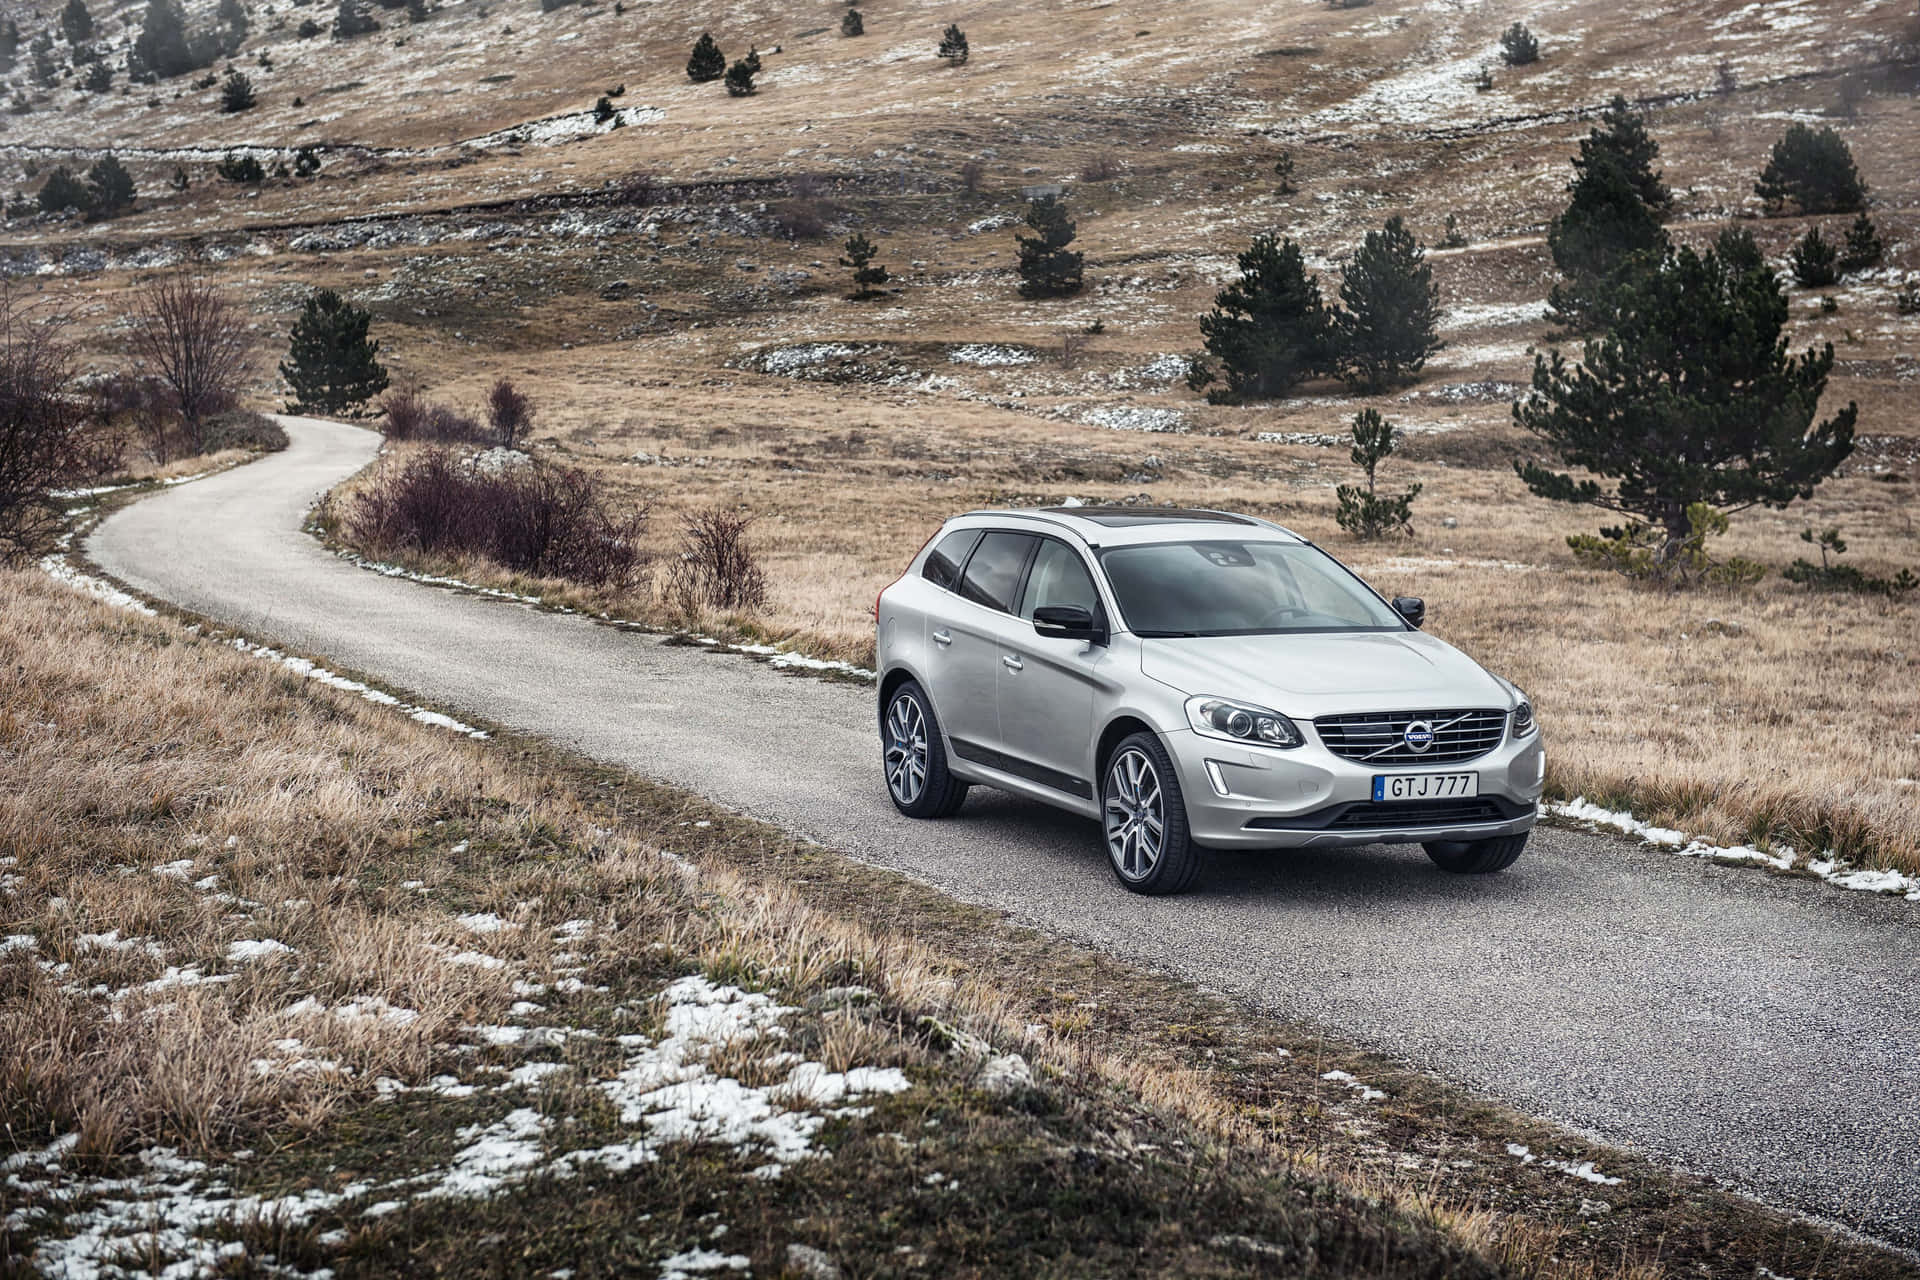 Caption: Immaculate Volvo Xc60 On An Exhilarating Road Trip Wallpaper